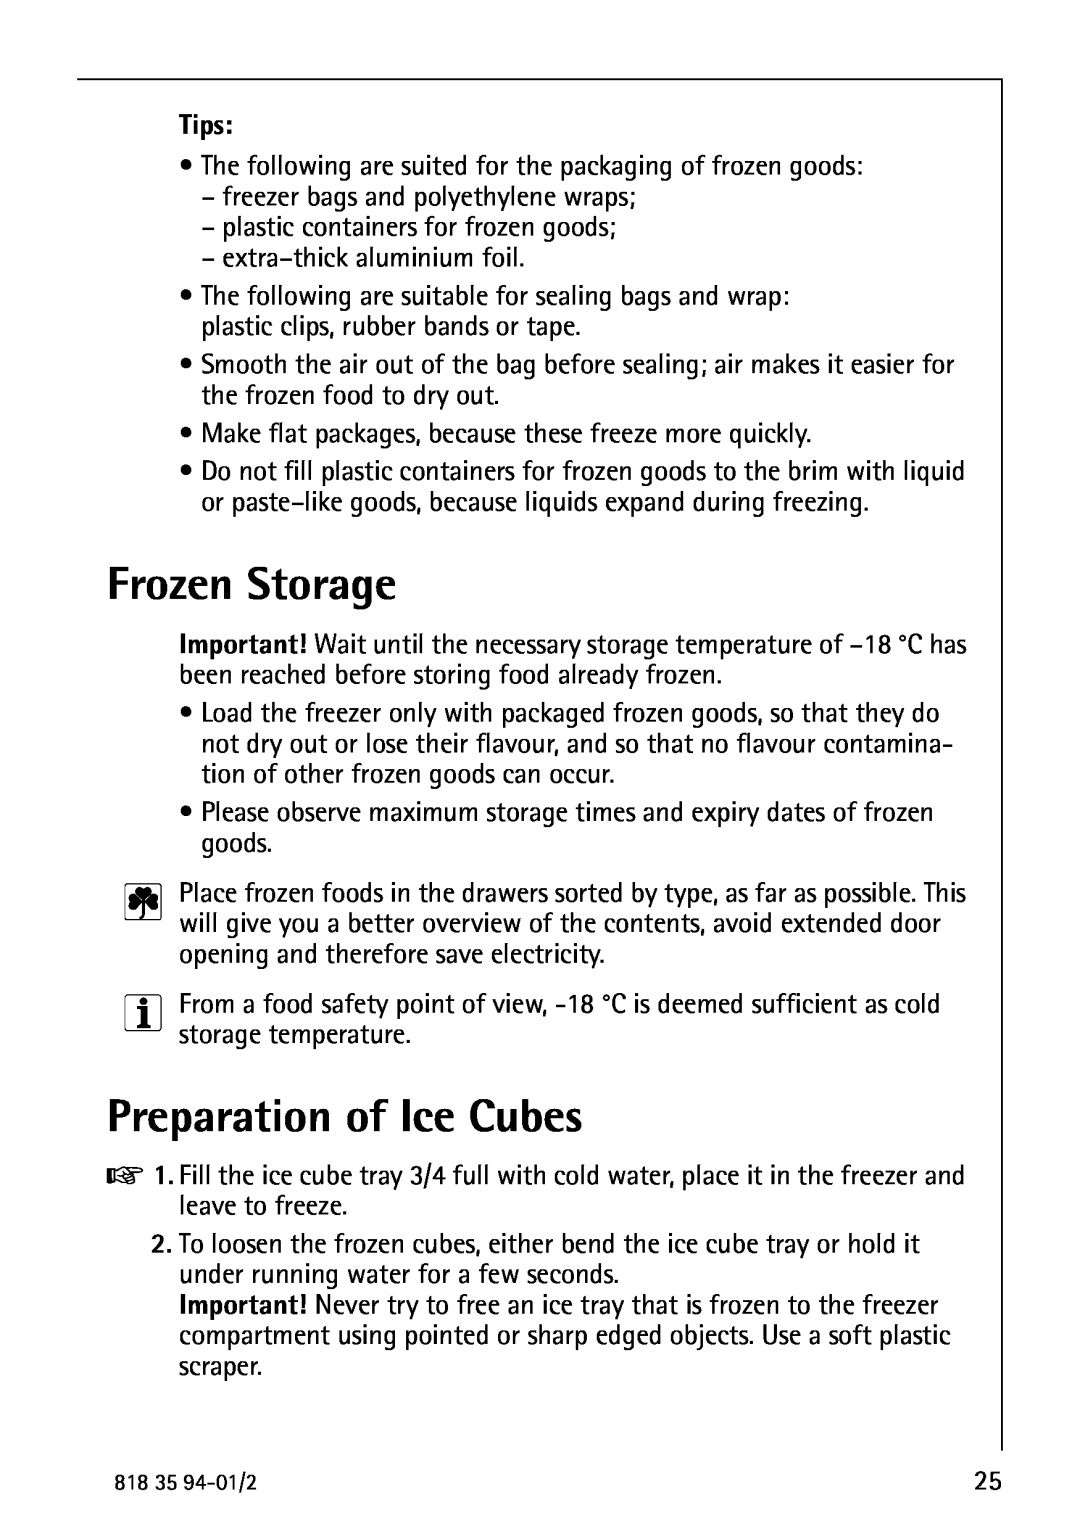 Electrolux U31462 operating instructions Frozen Storage, Preparation of Ice Cubes, Tips 